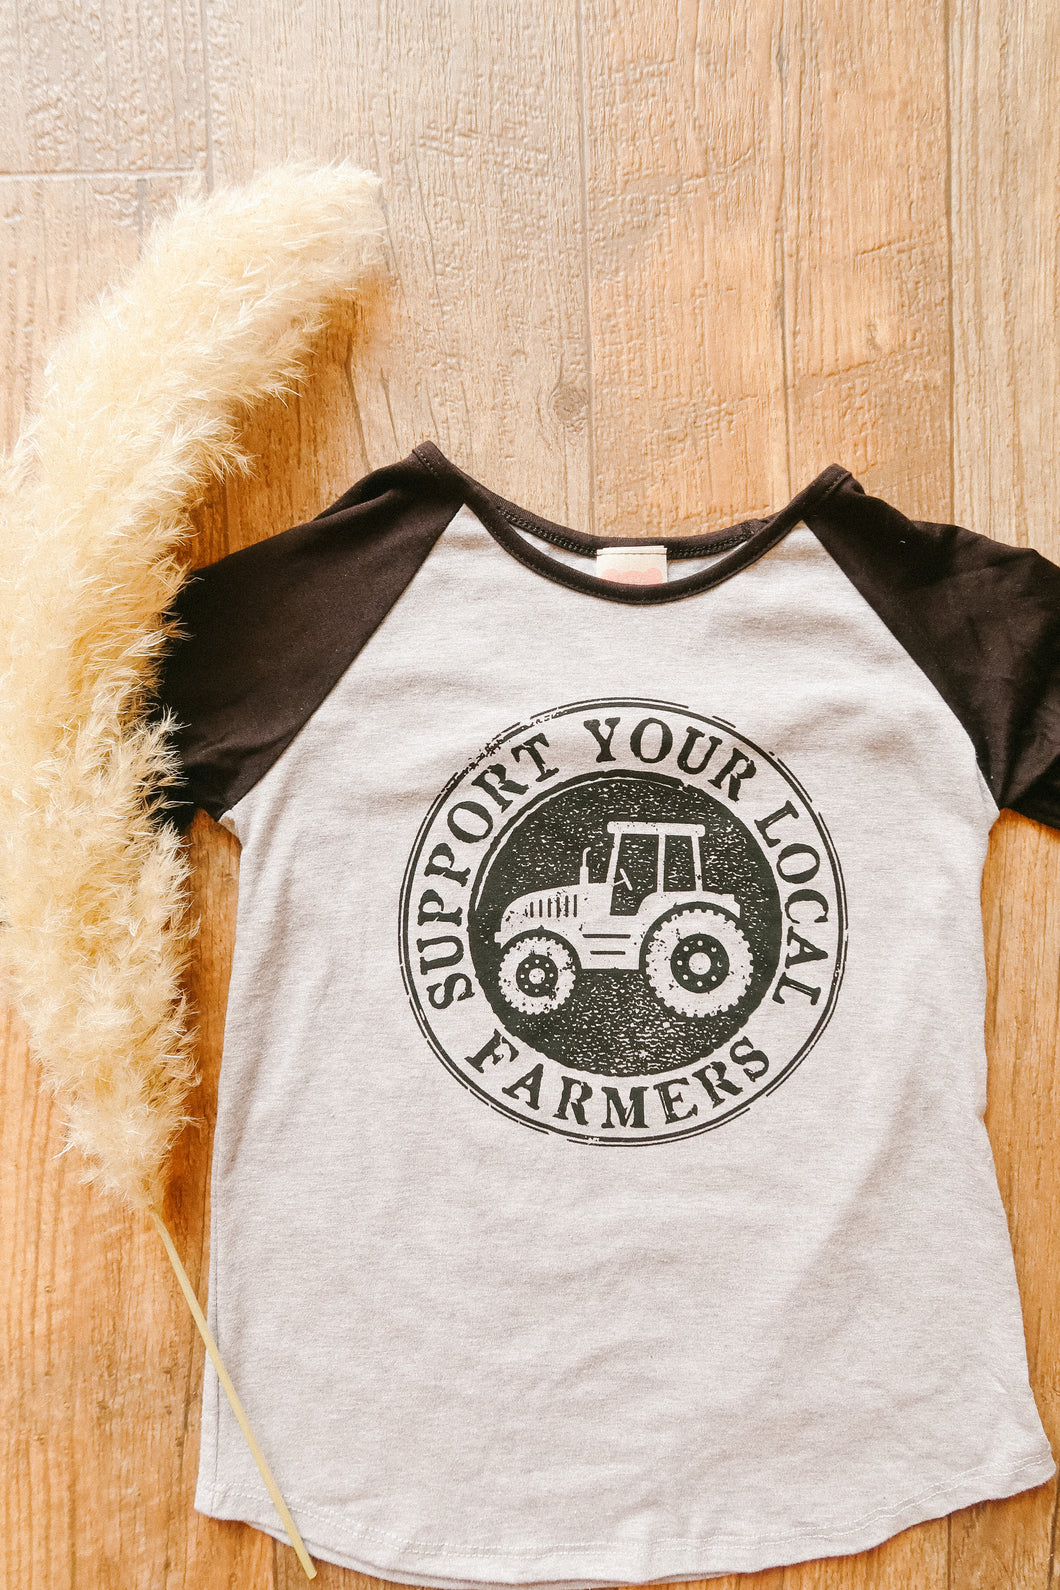 Support Your Local Farmers Kids Tee